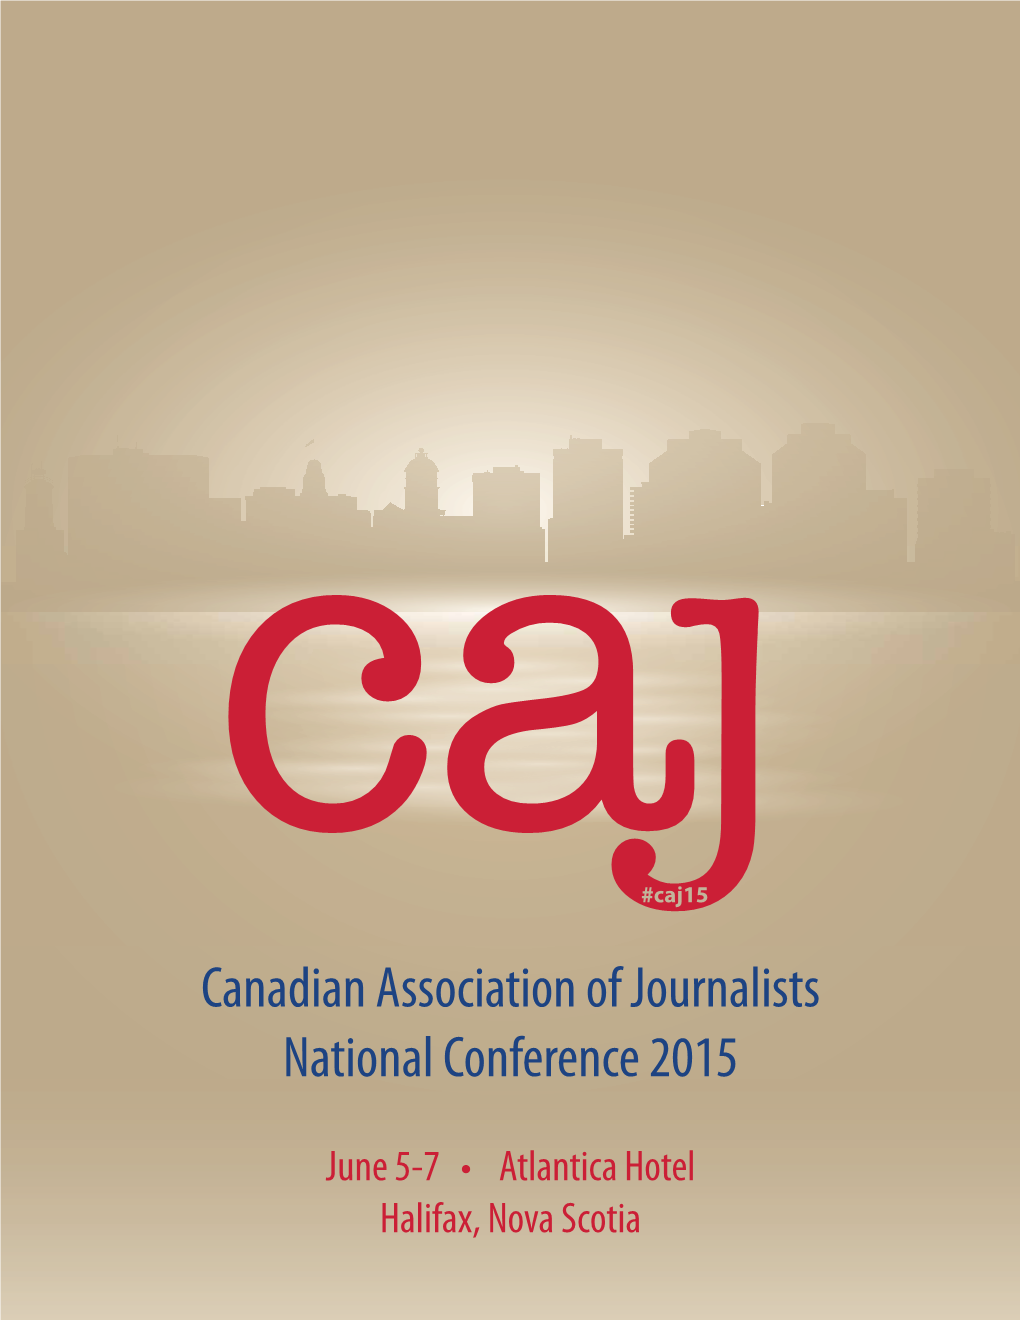 Canadian Association of Journalists National Conference 2015